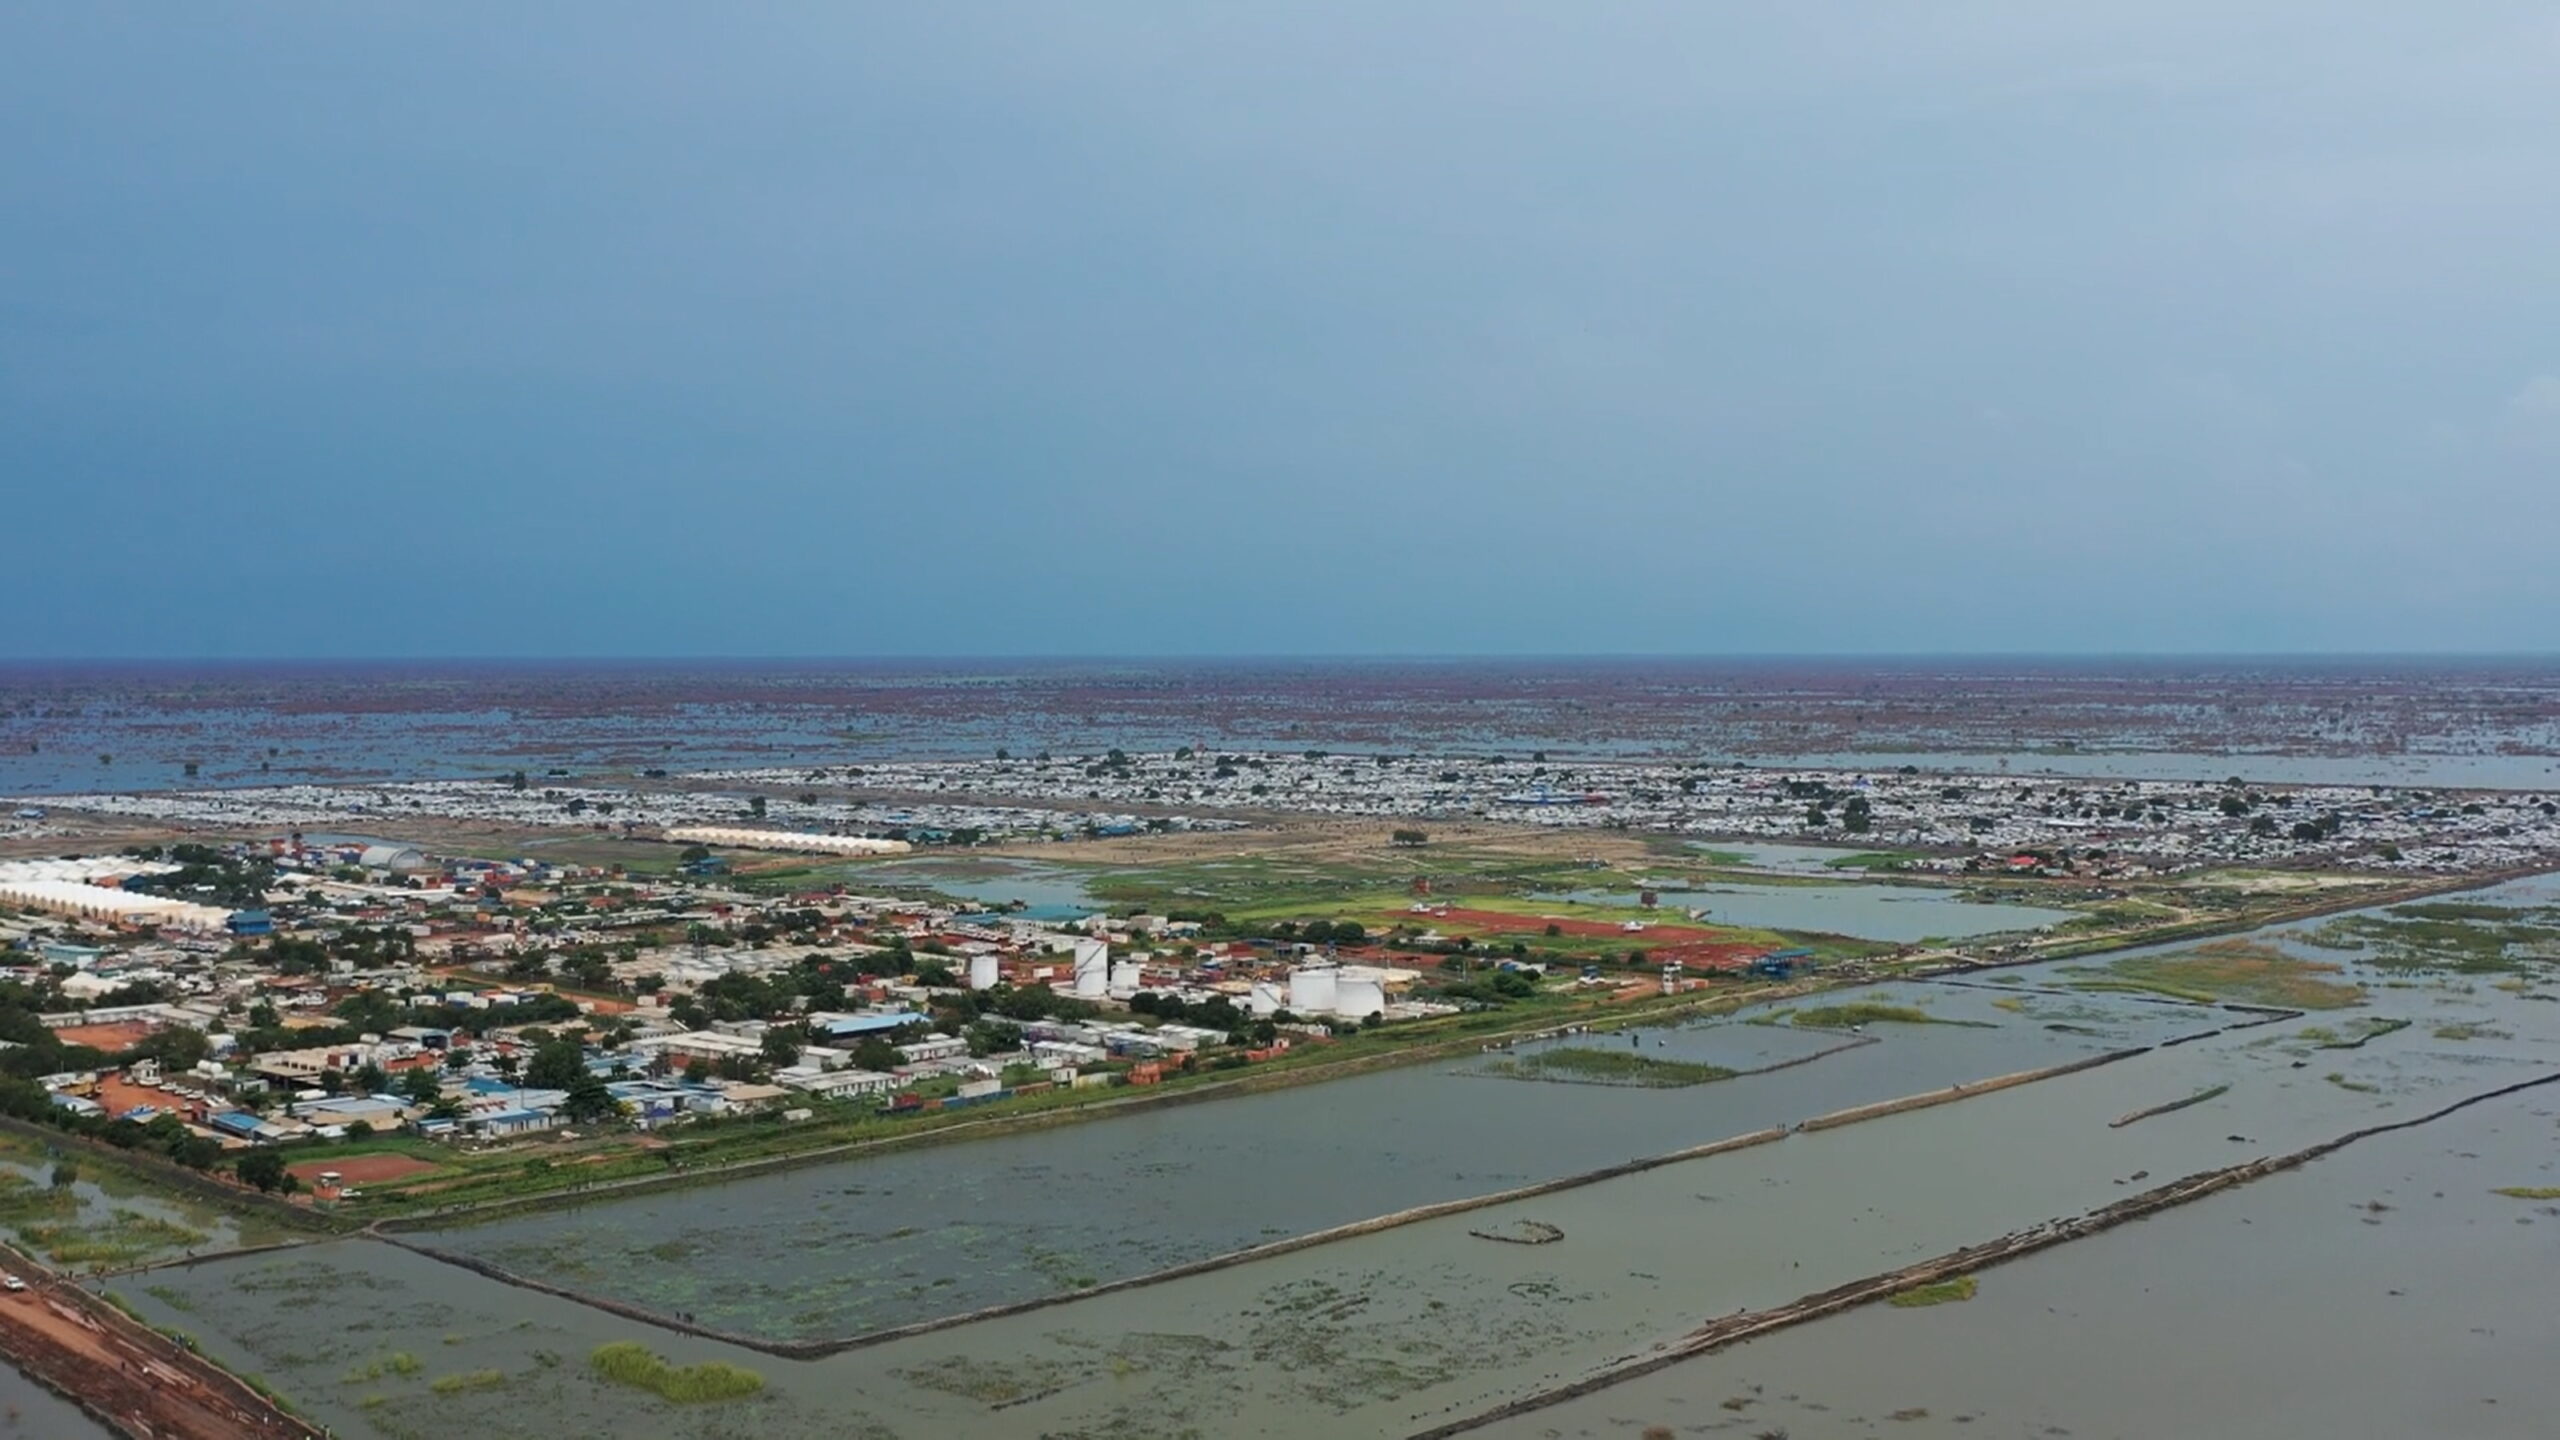 Aerial view of South Sudan’s capital, Bentiu, which became an island surrounded by floodwaters after record-breaking rains in October 2022. Photo: Charlotte Hallqvist / UNHCR